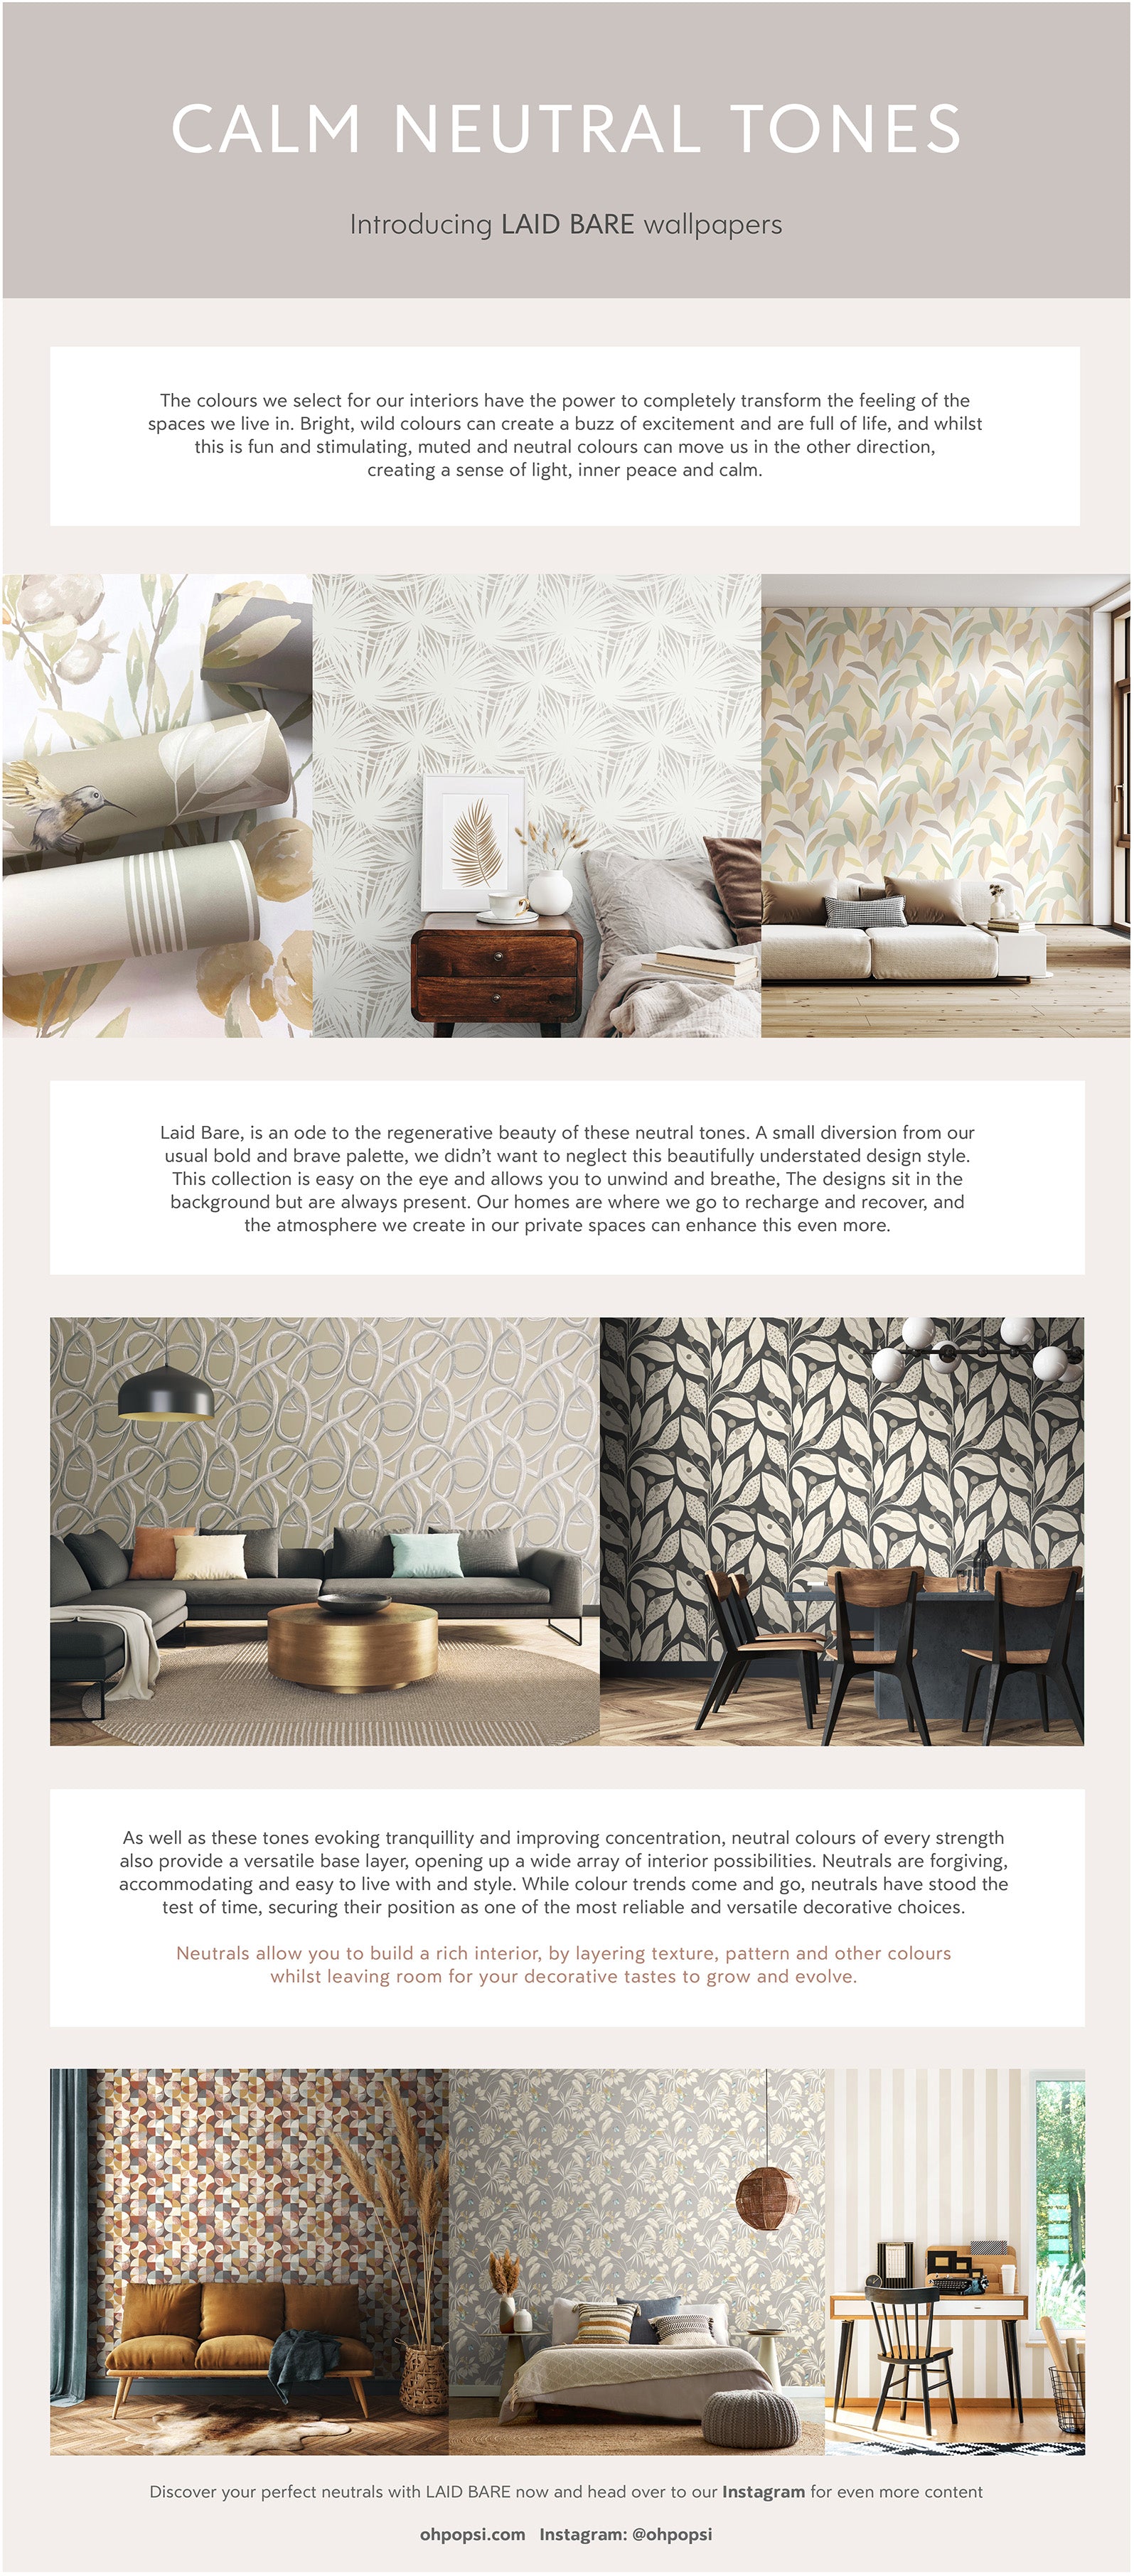 Introducing LAID BARE wallpapers